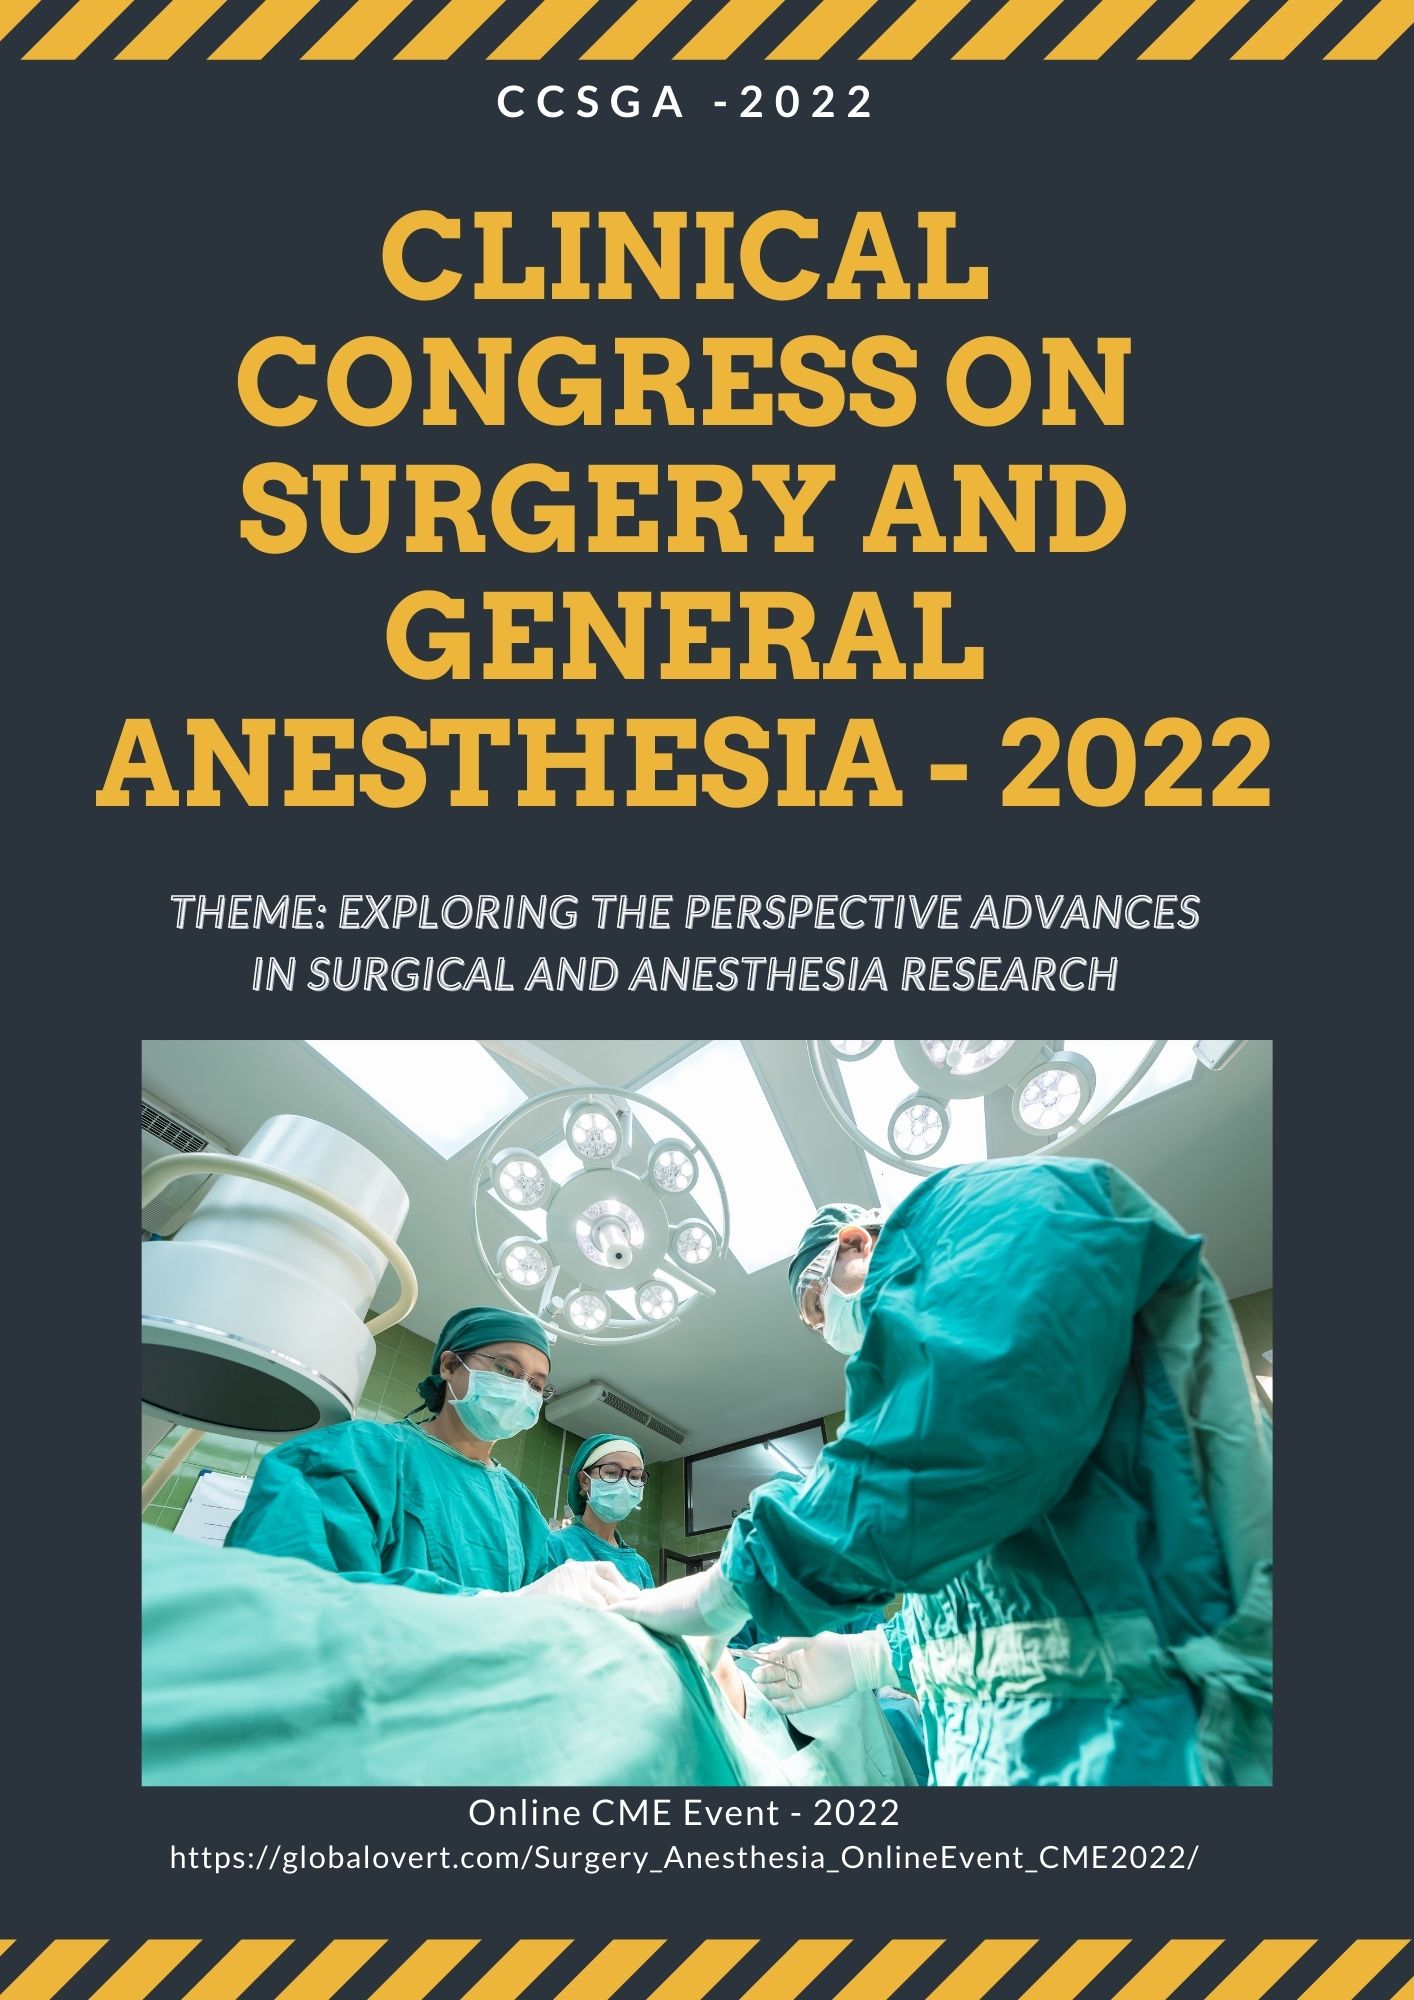 Clinical Congress on Surgery and General Anesthesia - 2022